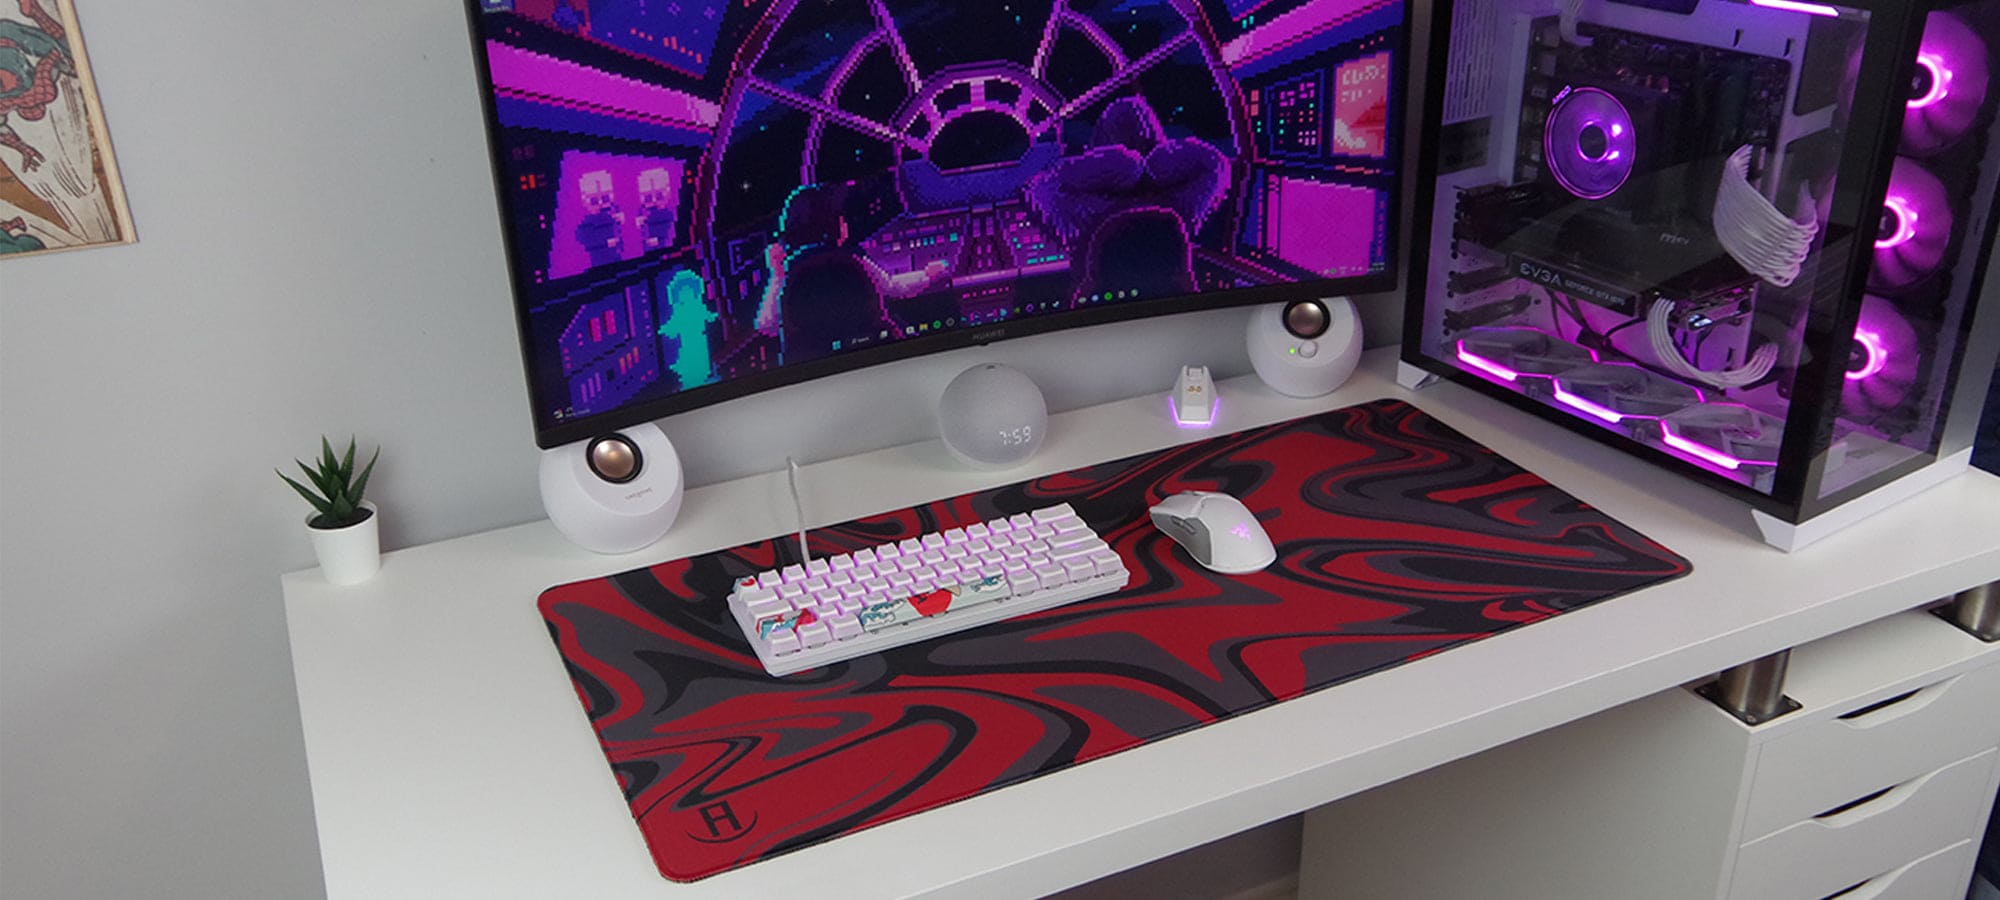 Black grey and red liquefied deskpad and mousepad on desk 45 degree angle view